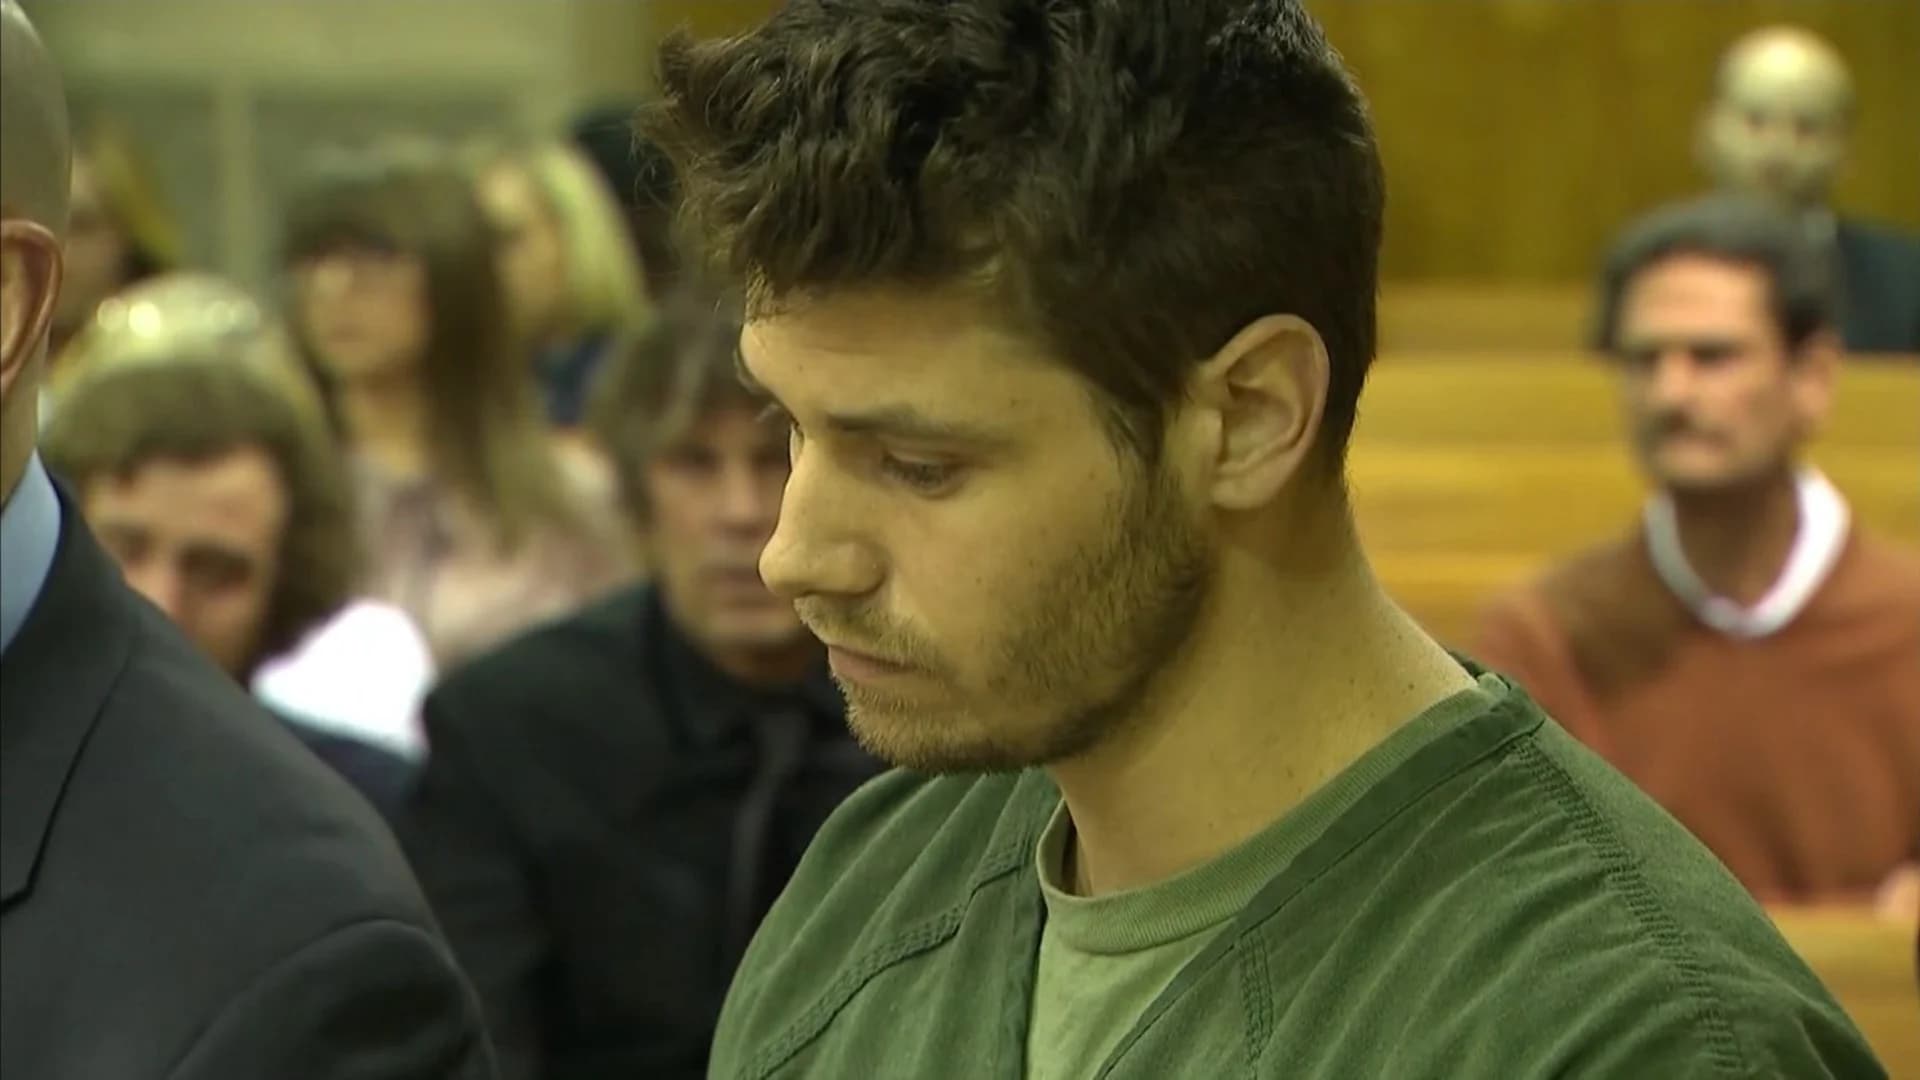 Man accused in deadly gas station crash ordered to remain in jail until trial